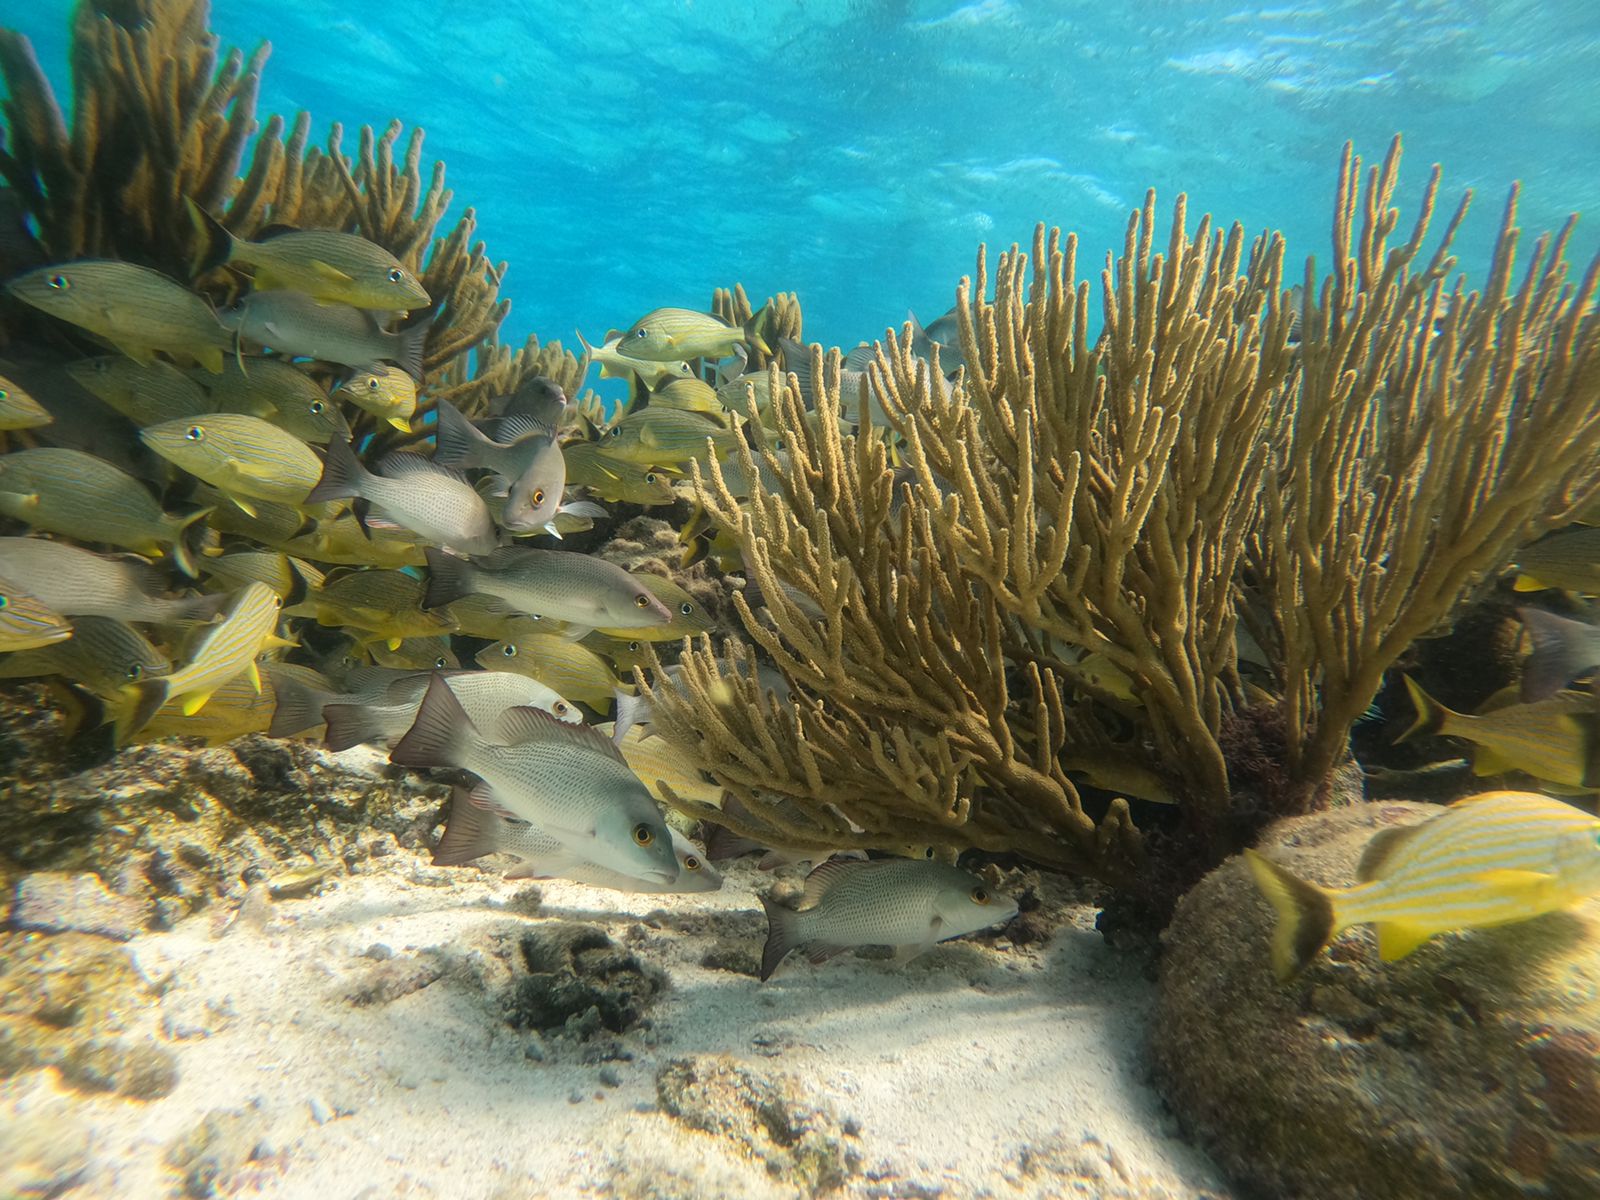 Captain Amado Watson's tour company, Caye Caulker Reef Friendly Tours, is very different from the average company you’ll find in Belize ecotourism. Learn more in Episode 70 of the For Animals For Earth show.